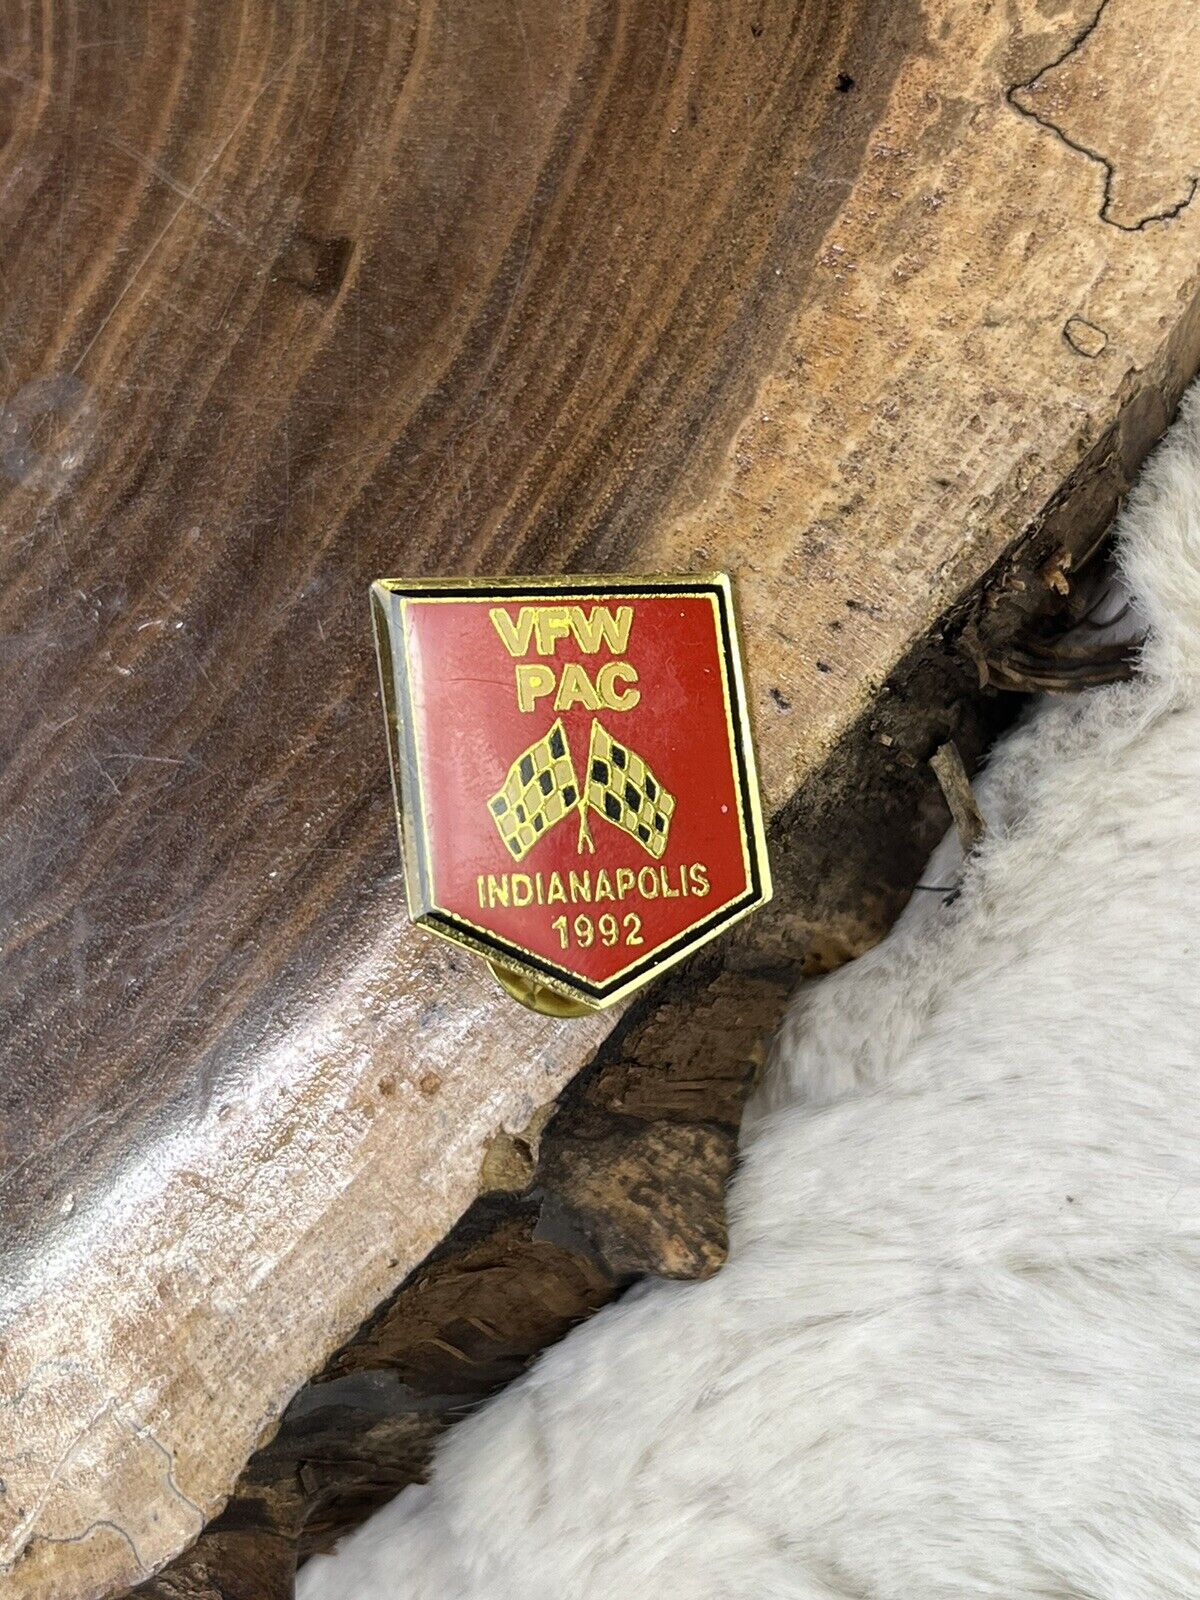 VFW PAC Indianapolis 1992 Red Gold Pin lapel